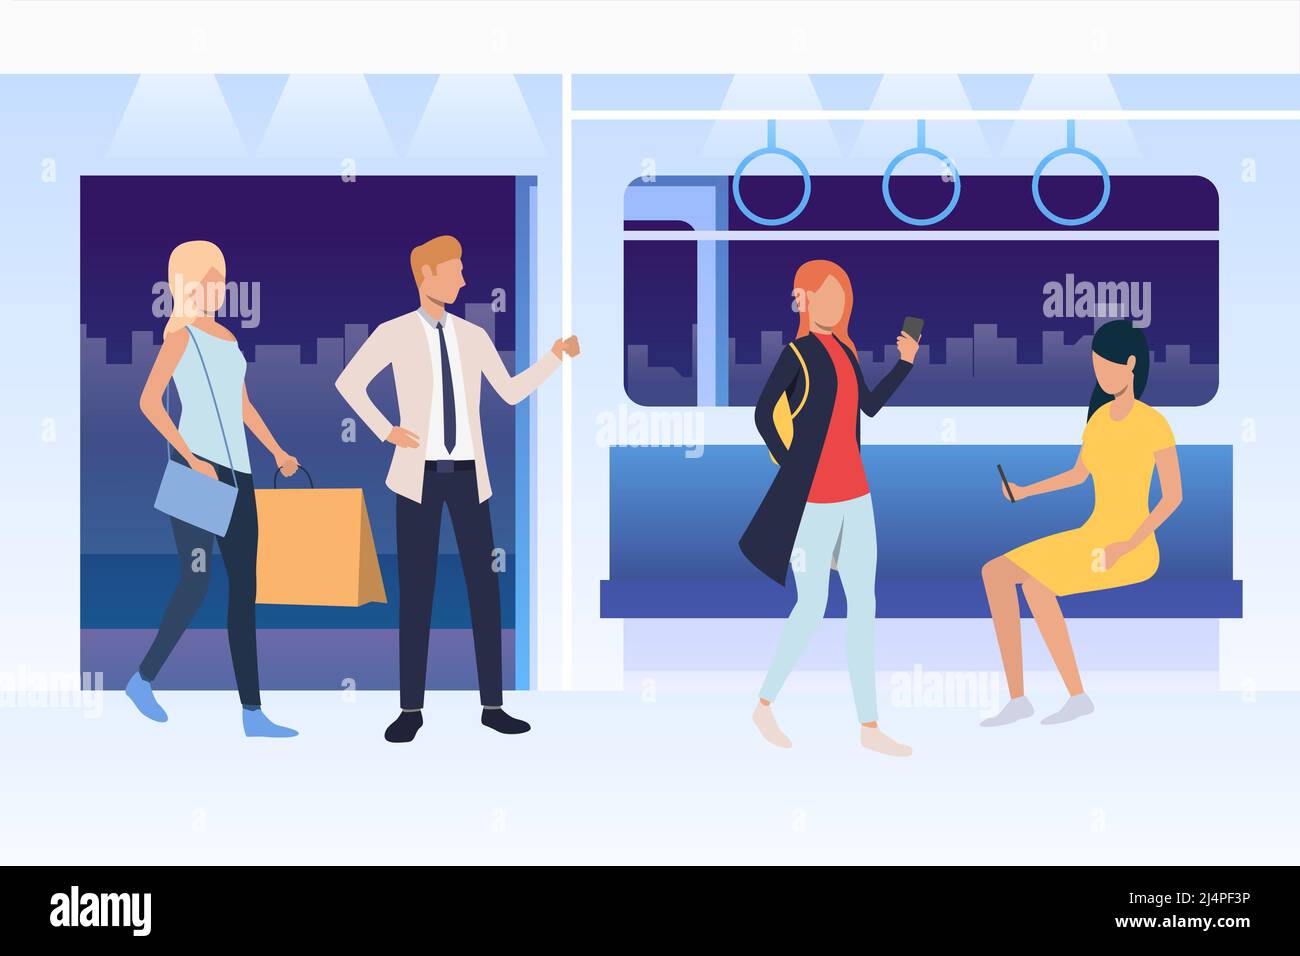 People sitting and standing in subway train. Passengers using smartphones, holding bags. Public transport concept. Vector illustration can be used for Stock Vector